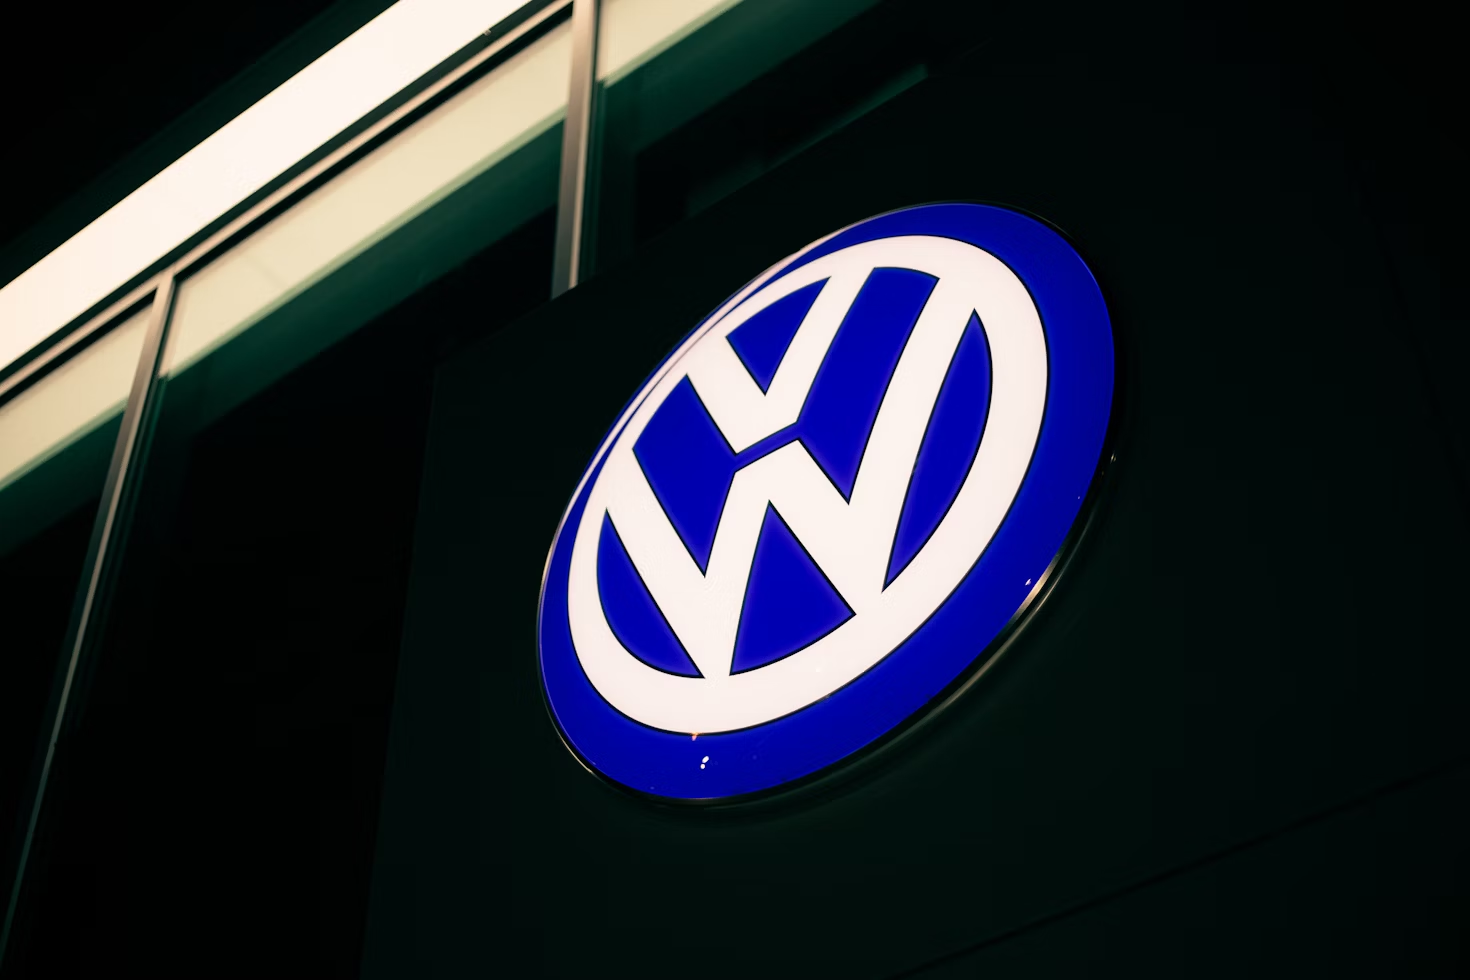 Behind The Scenes Of The Volkswagen Emissions Scandal